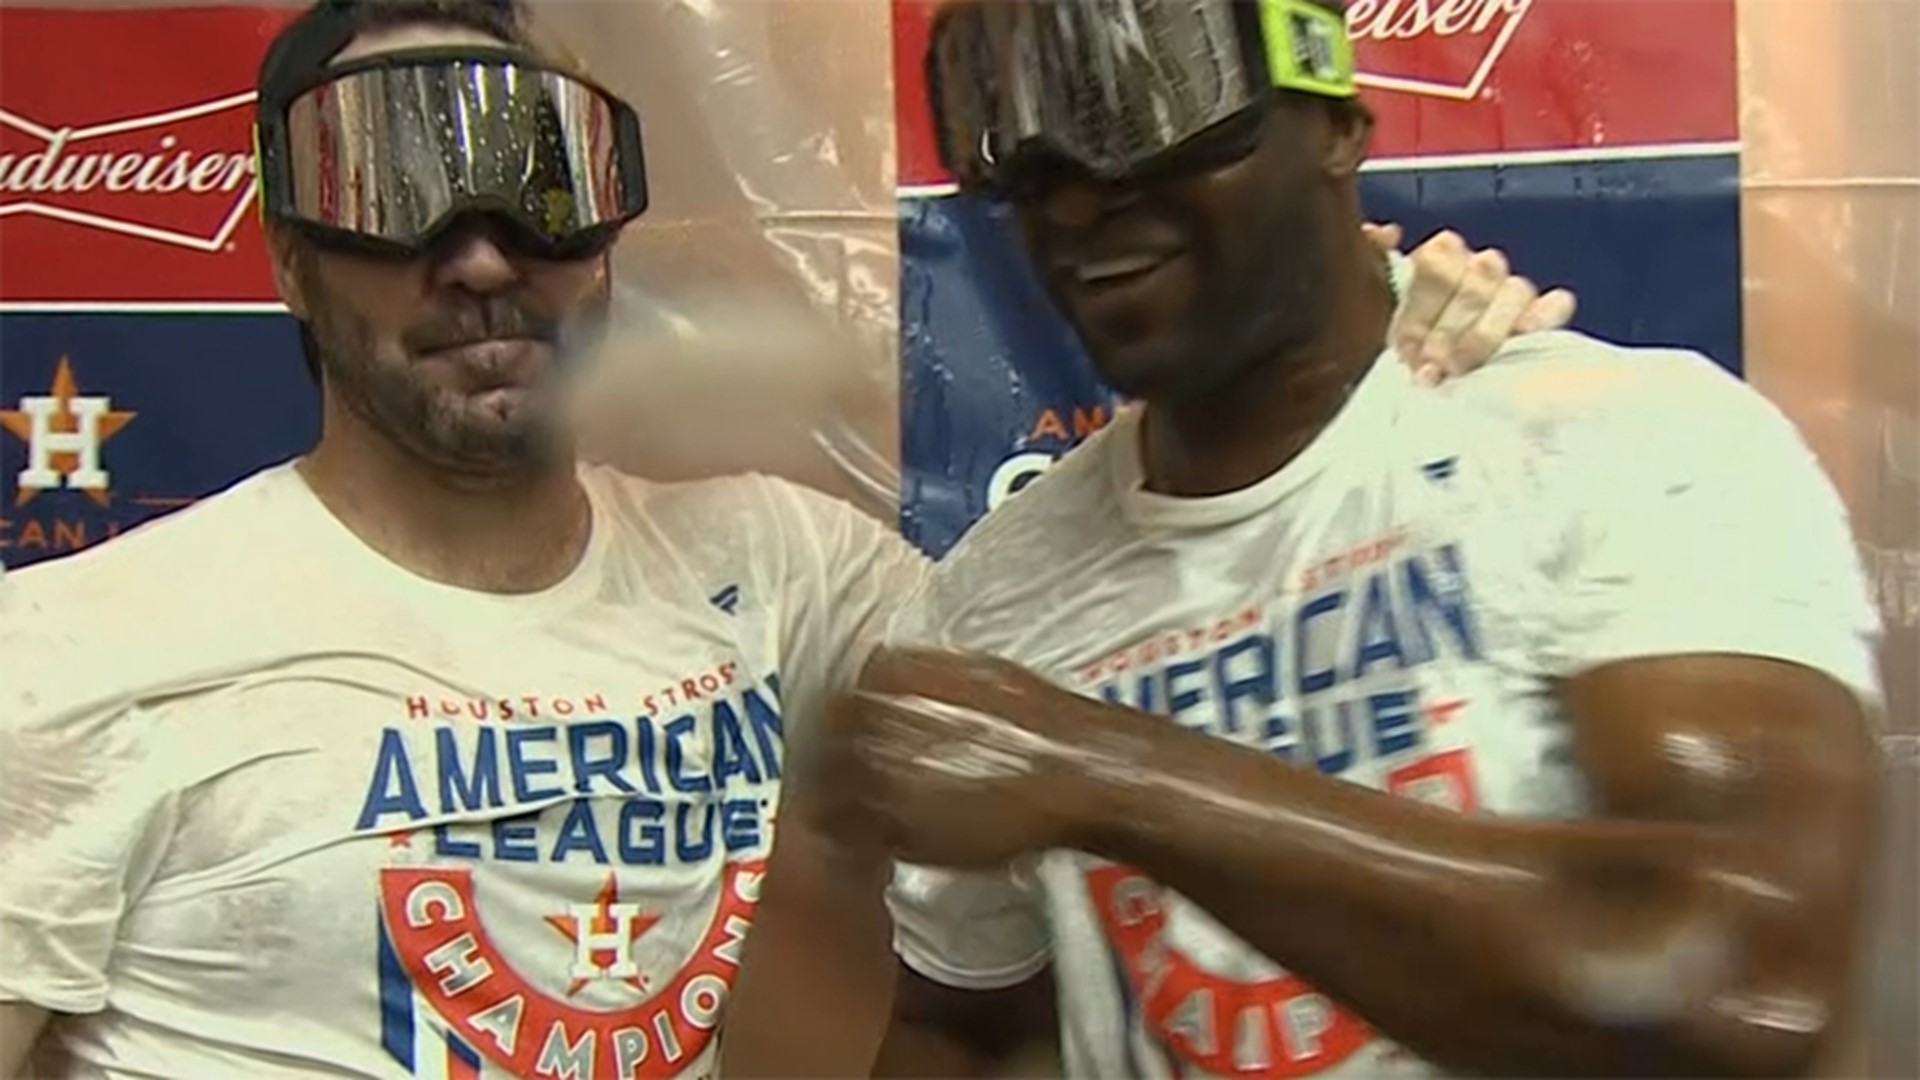 The Houston Astros are going back to the World Series for the fourth time in six years. They celebrated with champagne showers, hugs and high-fives.